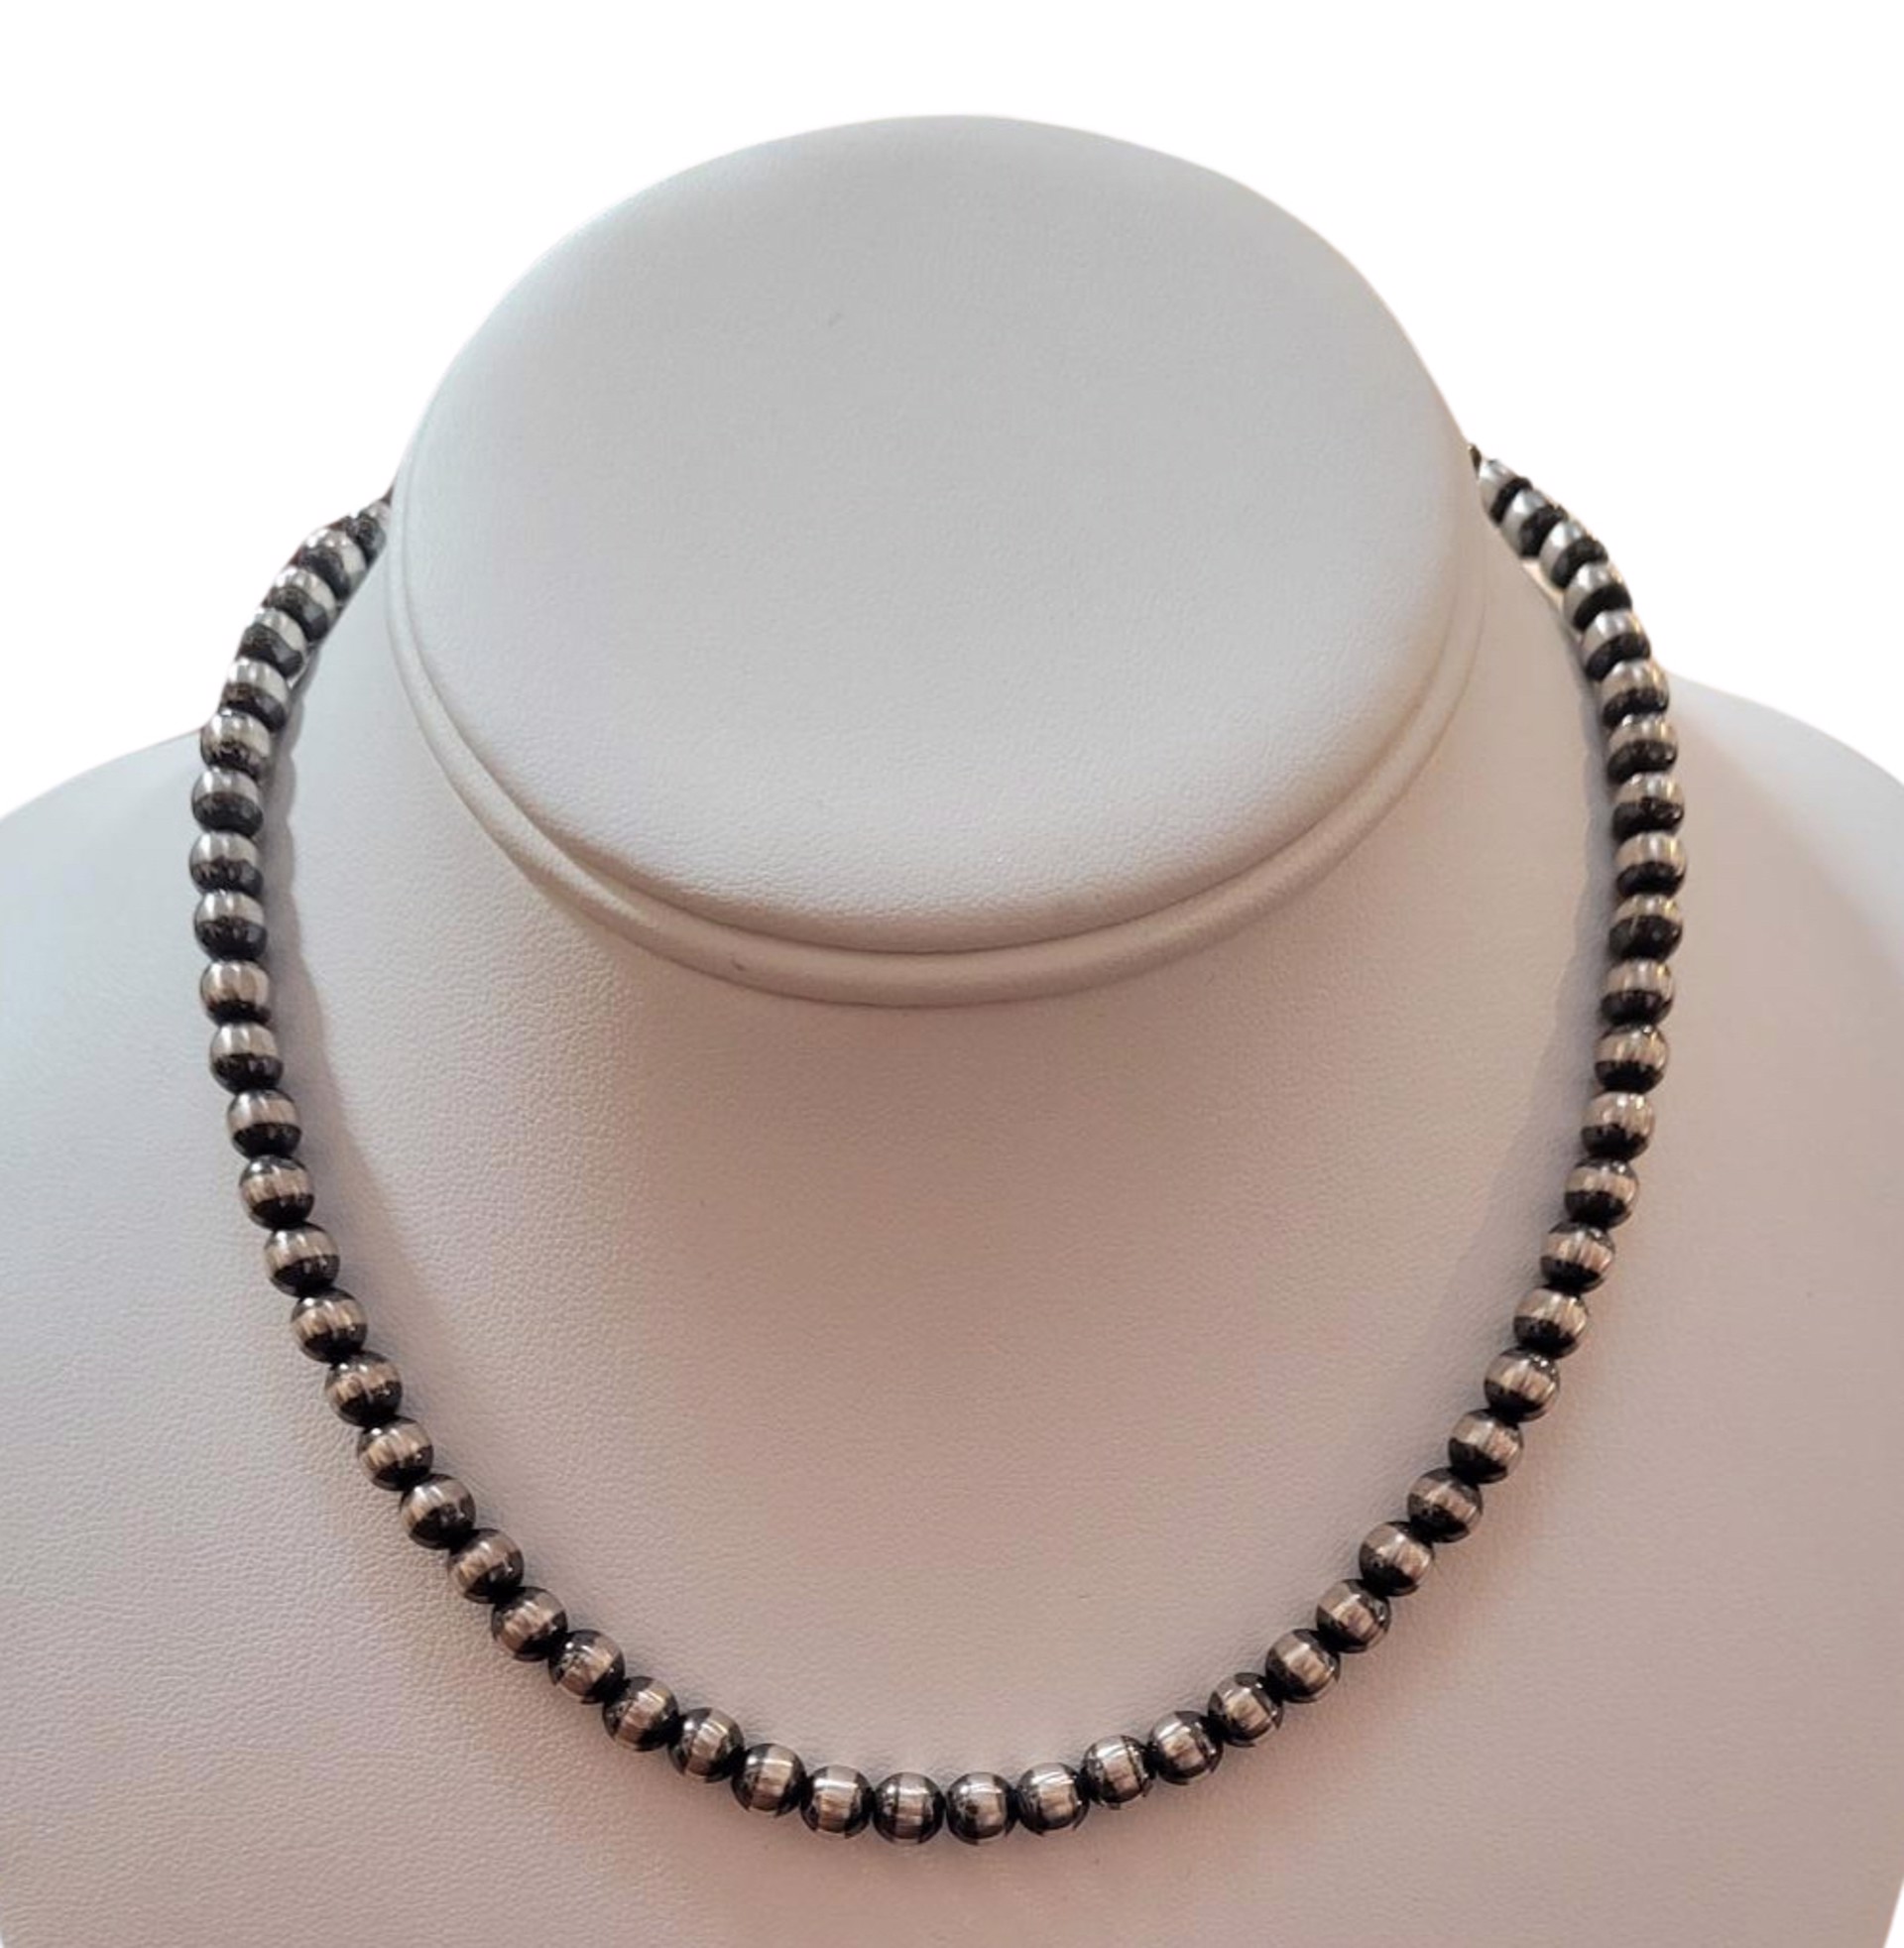 Necklace -  Sterling Silver Pearls 16" 6mm by Indigo Desert Ranch - Jewelry